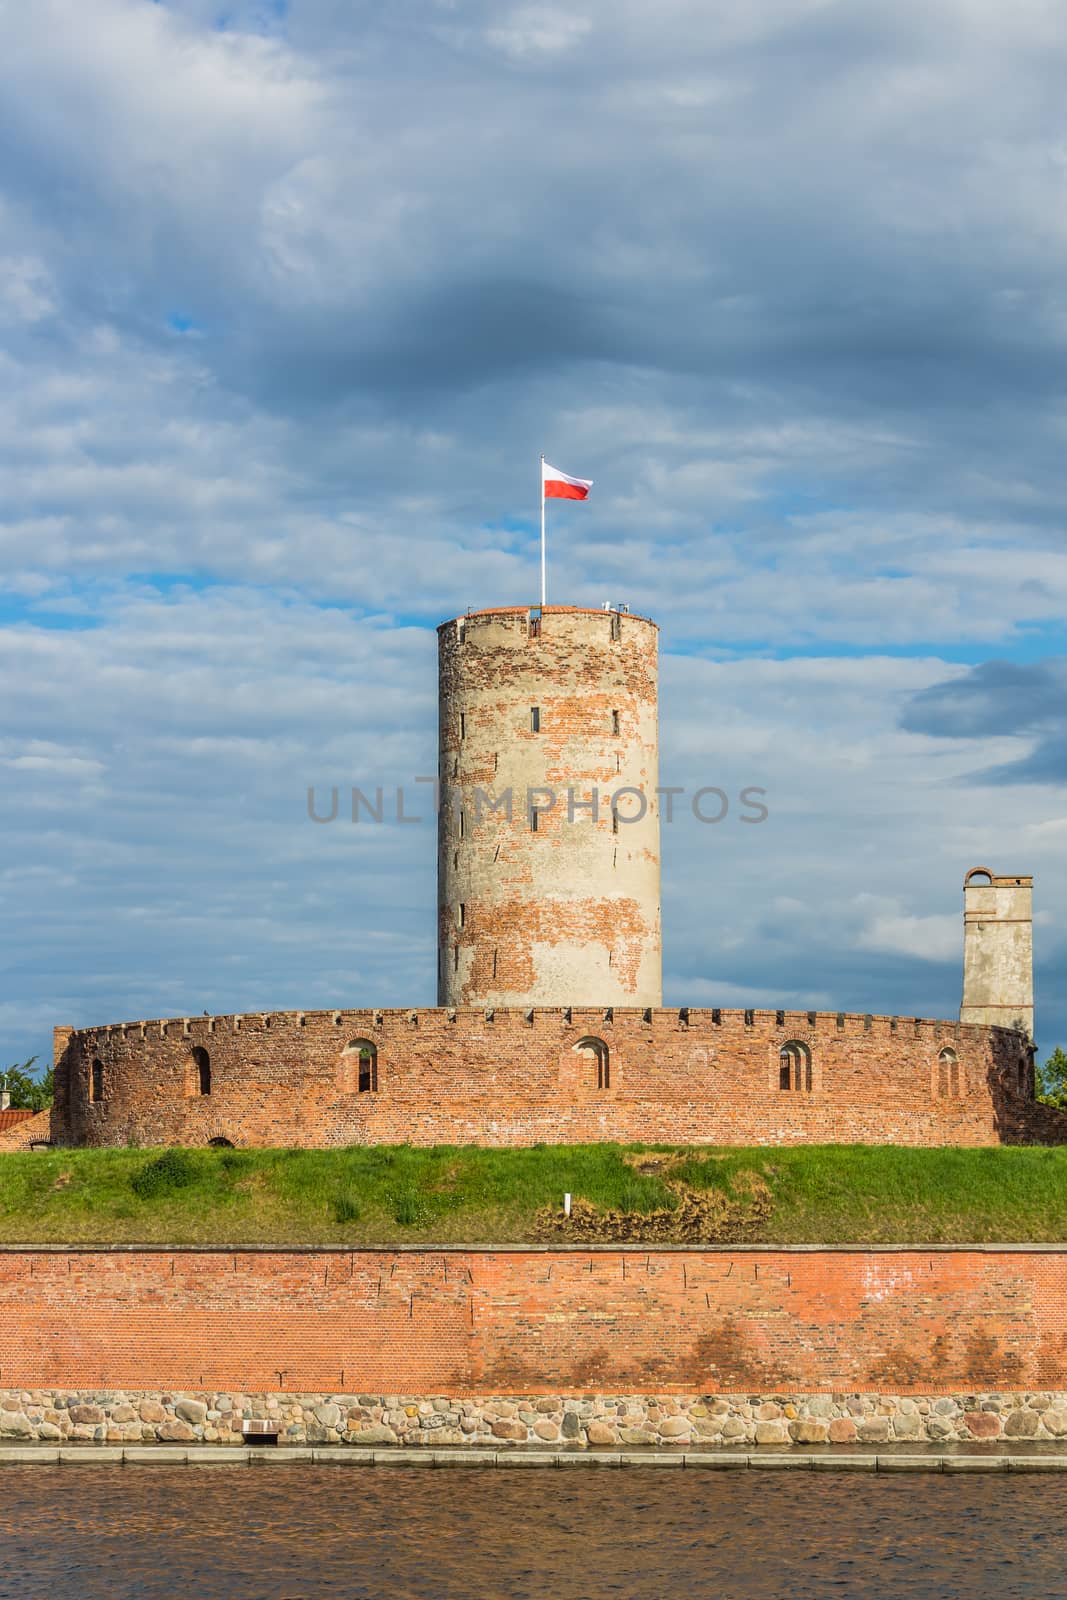 The Fort Carré of  the ancient Wisloujscie fortress in Gdansk, Poland. Located  over the Dead Vistula River, at the former mouth of the Vistula River to the Baltic Sea.